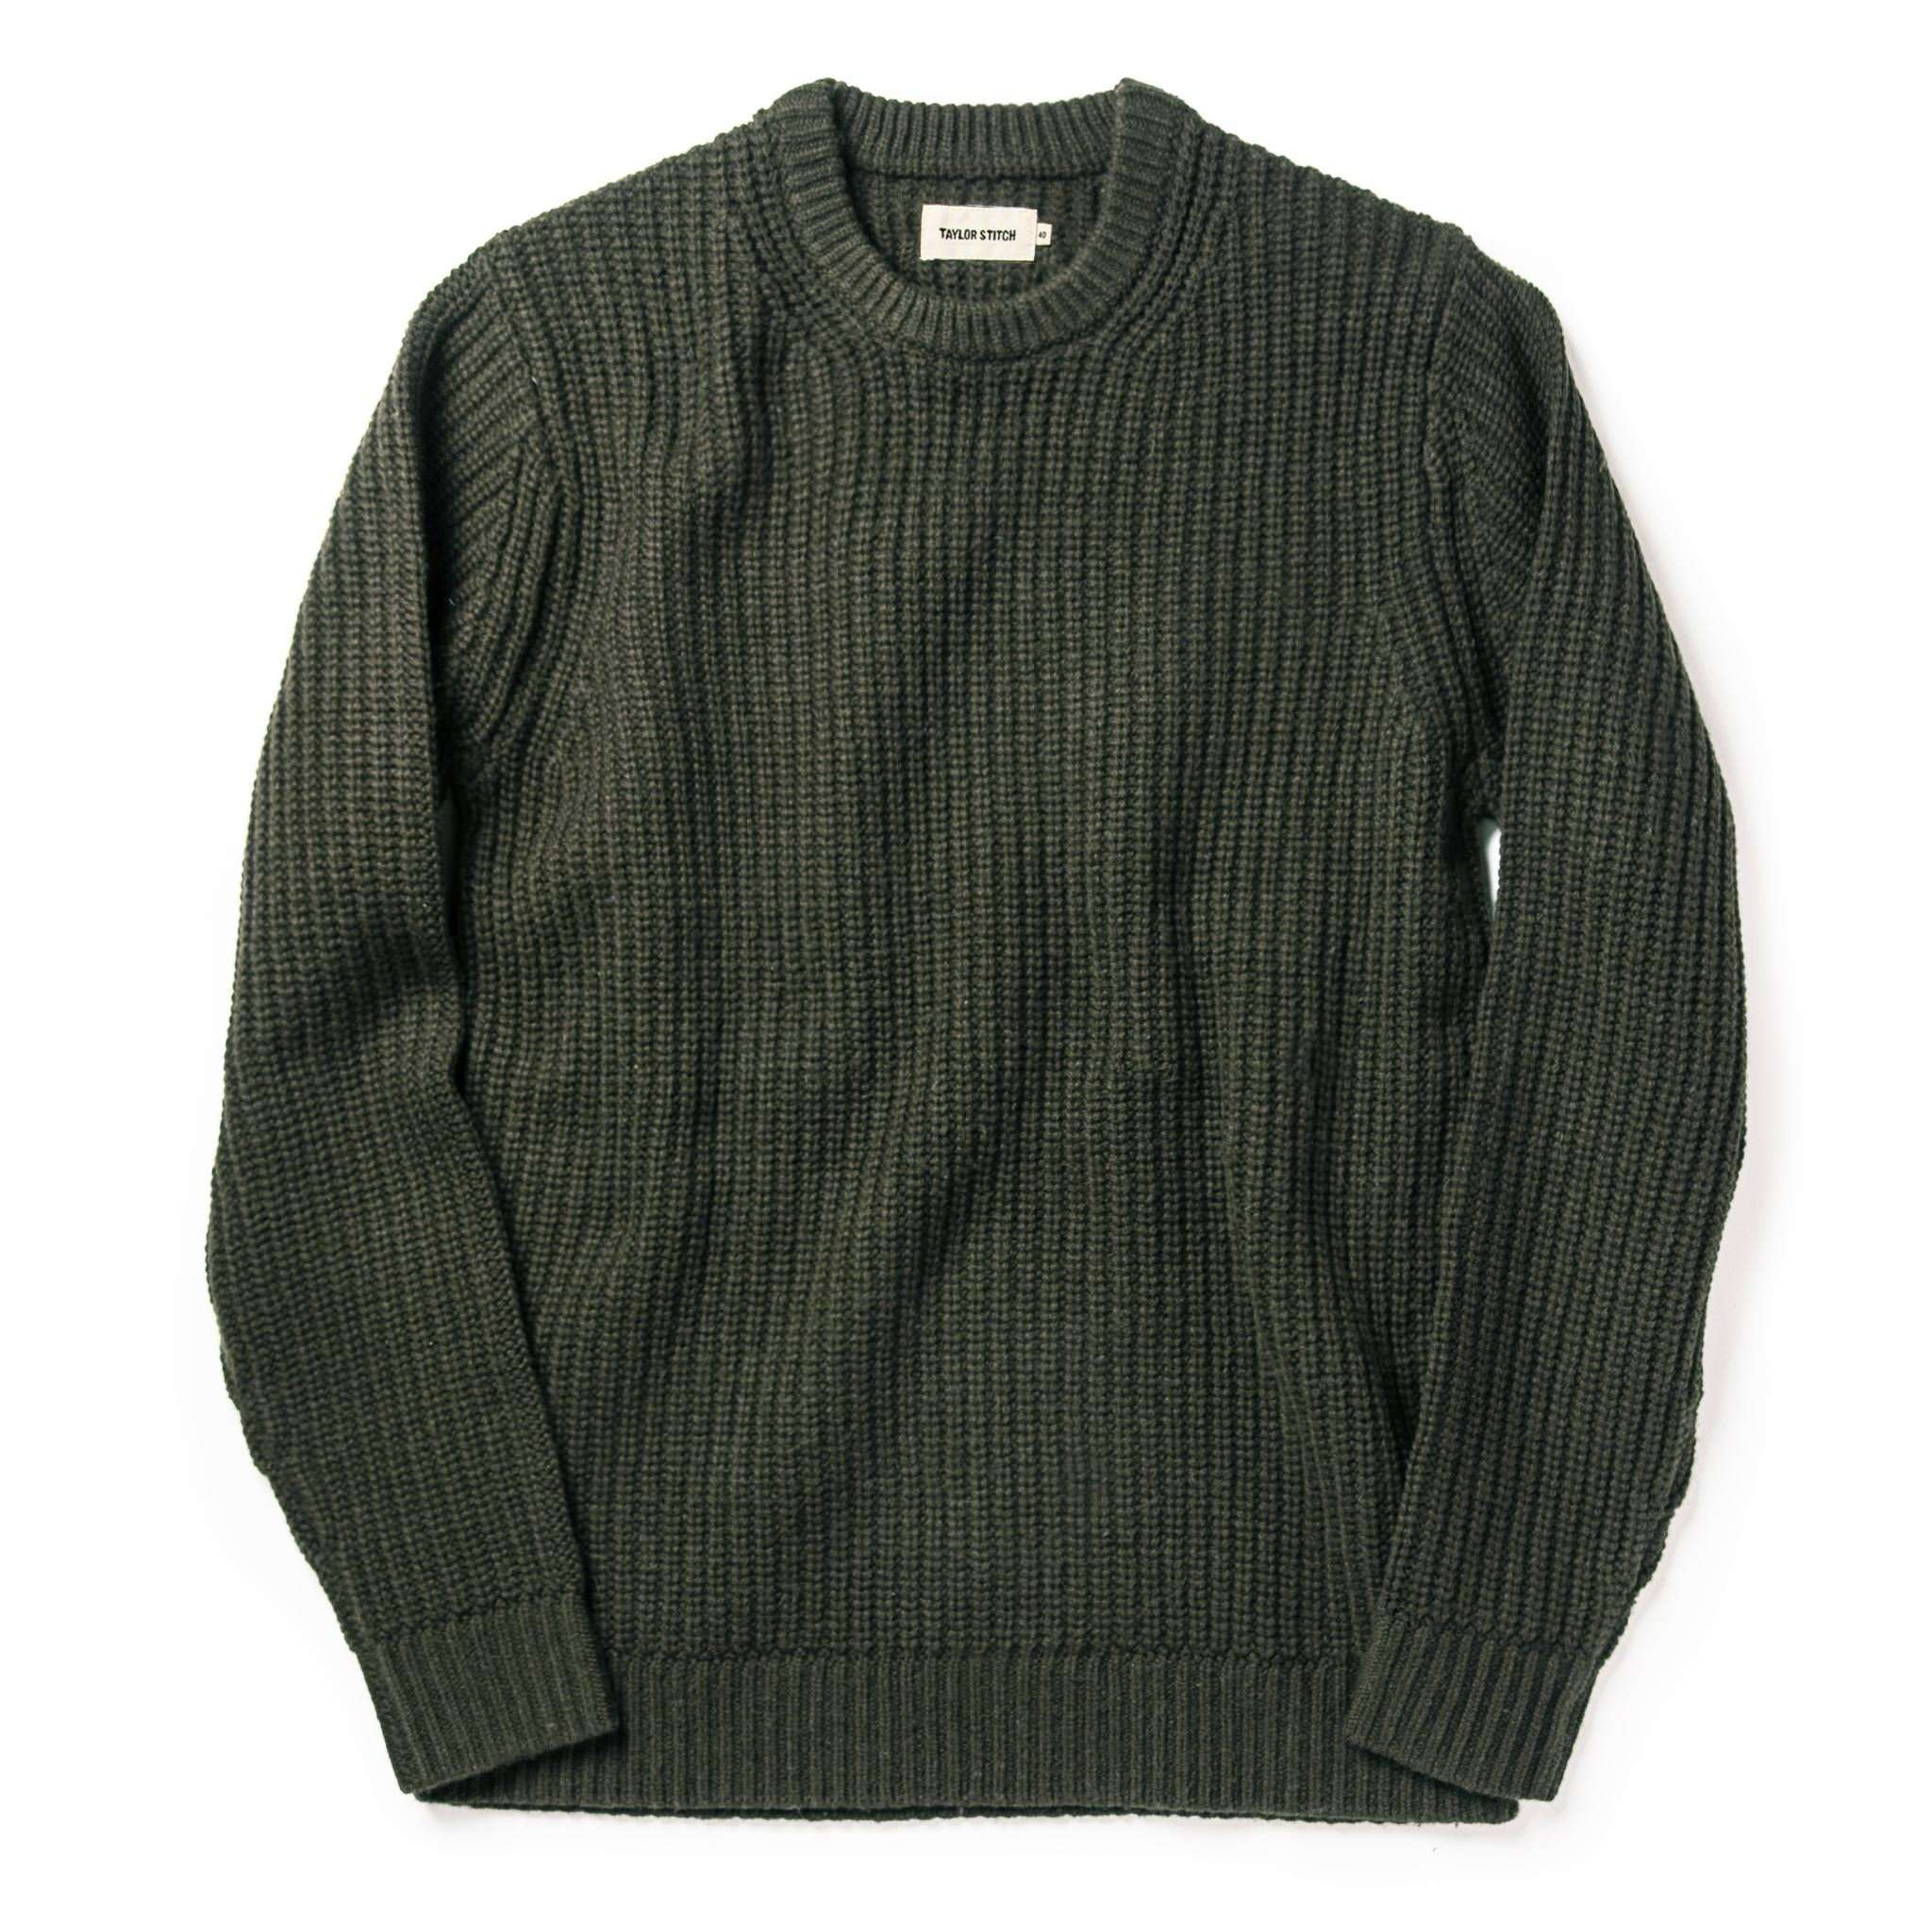 The Hardtack Sweater in Navy Donegal | Taylor Stitch